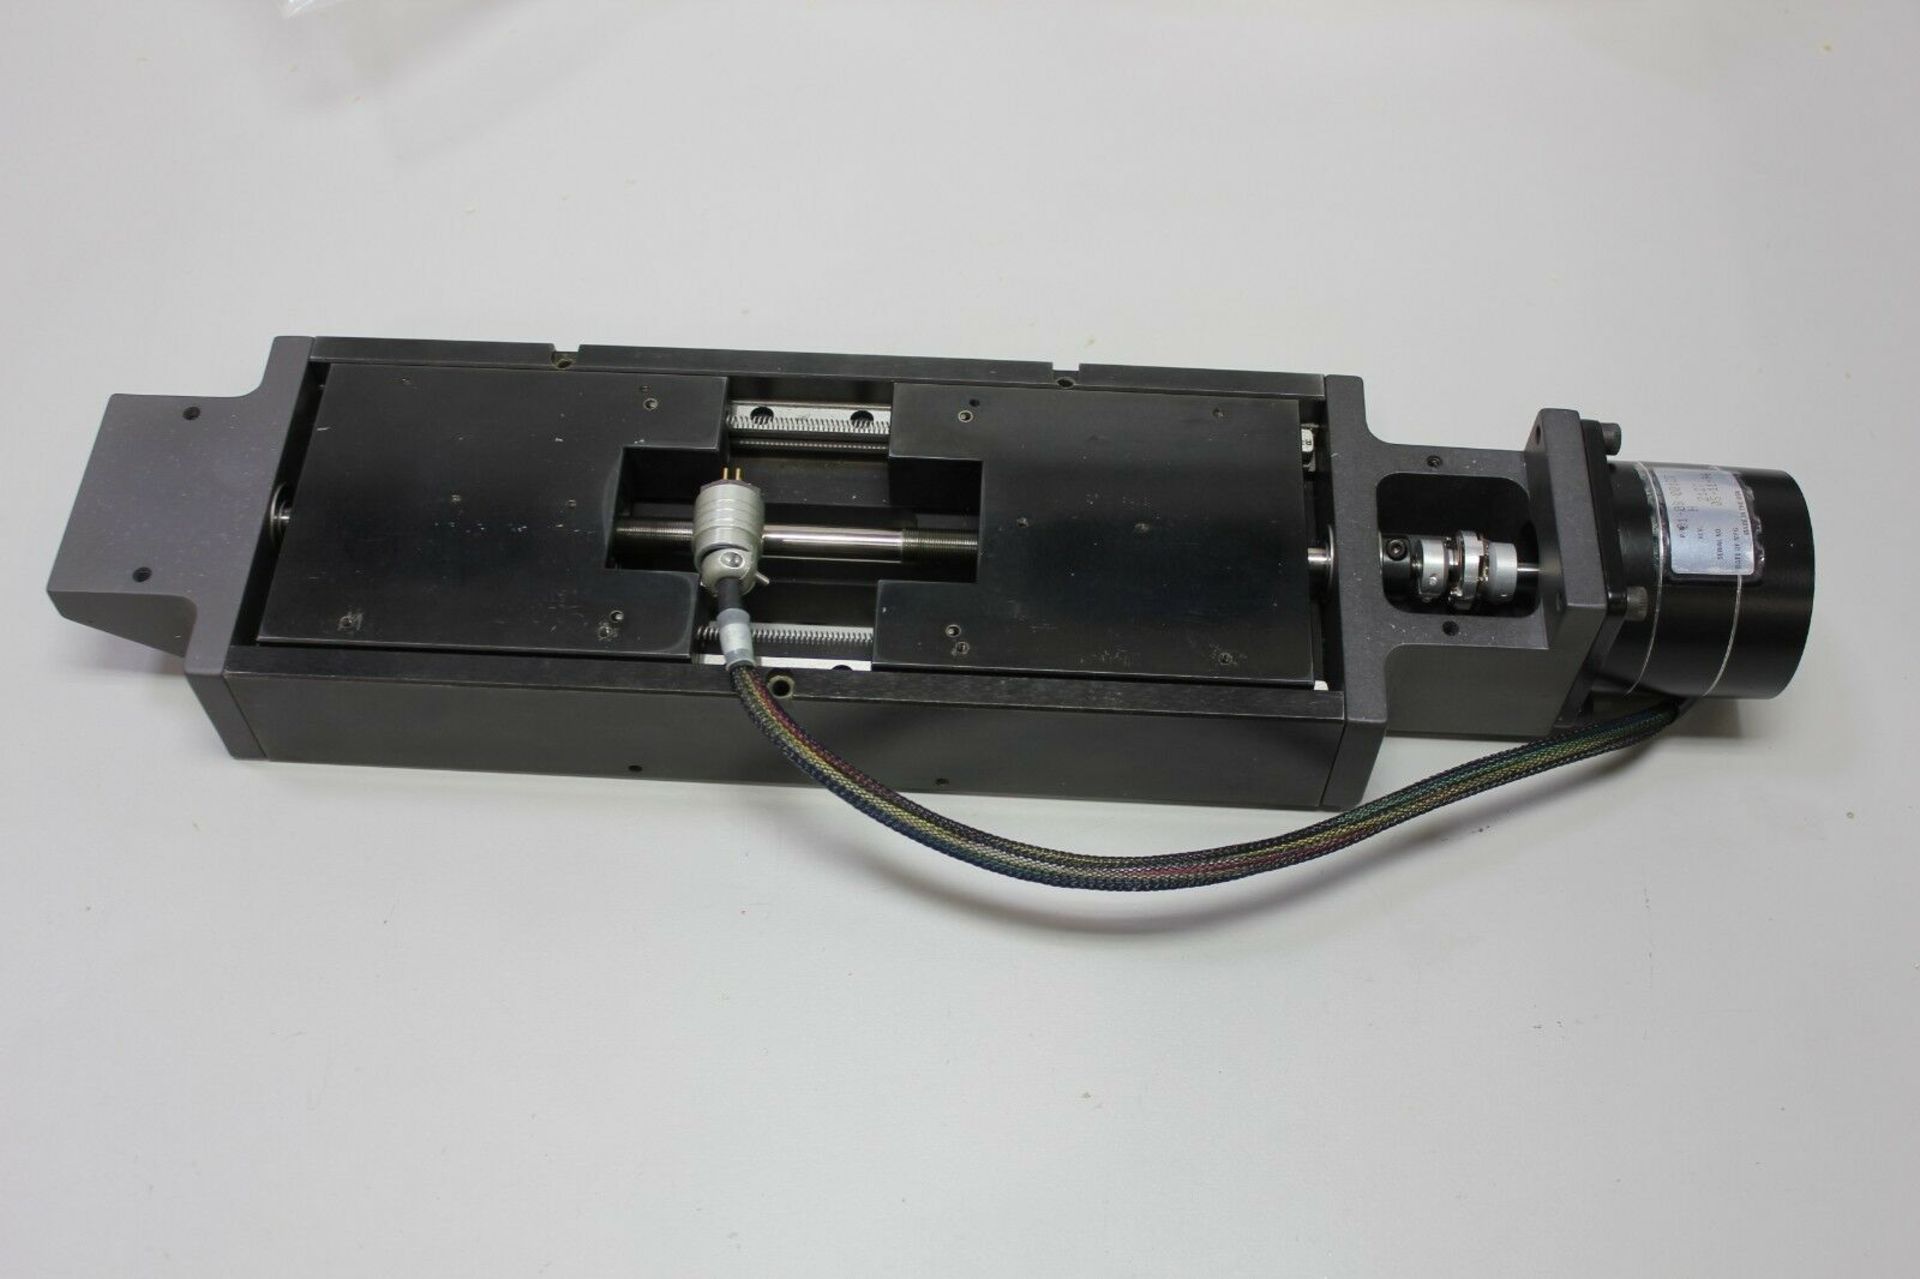 NEW ULTRATECH STEPPER LINEAR STAGE ASSEMBLY - Image 6 of 8